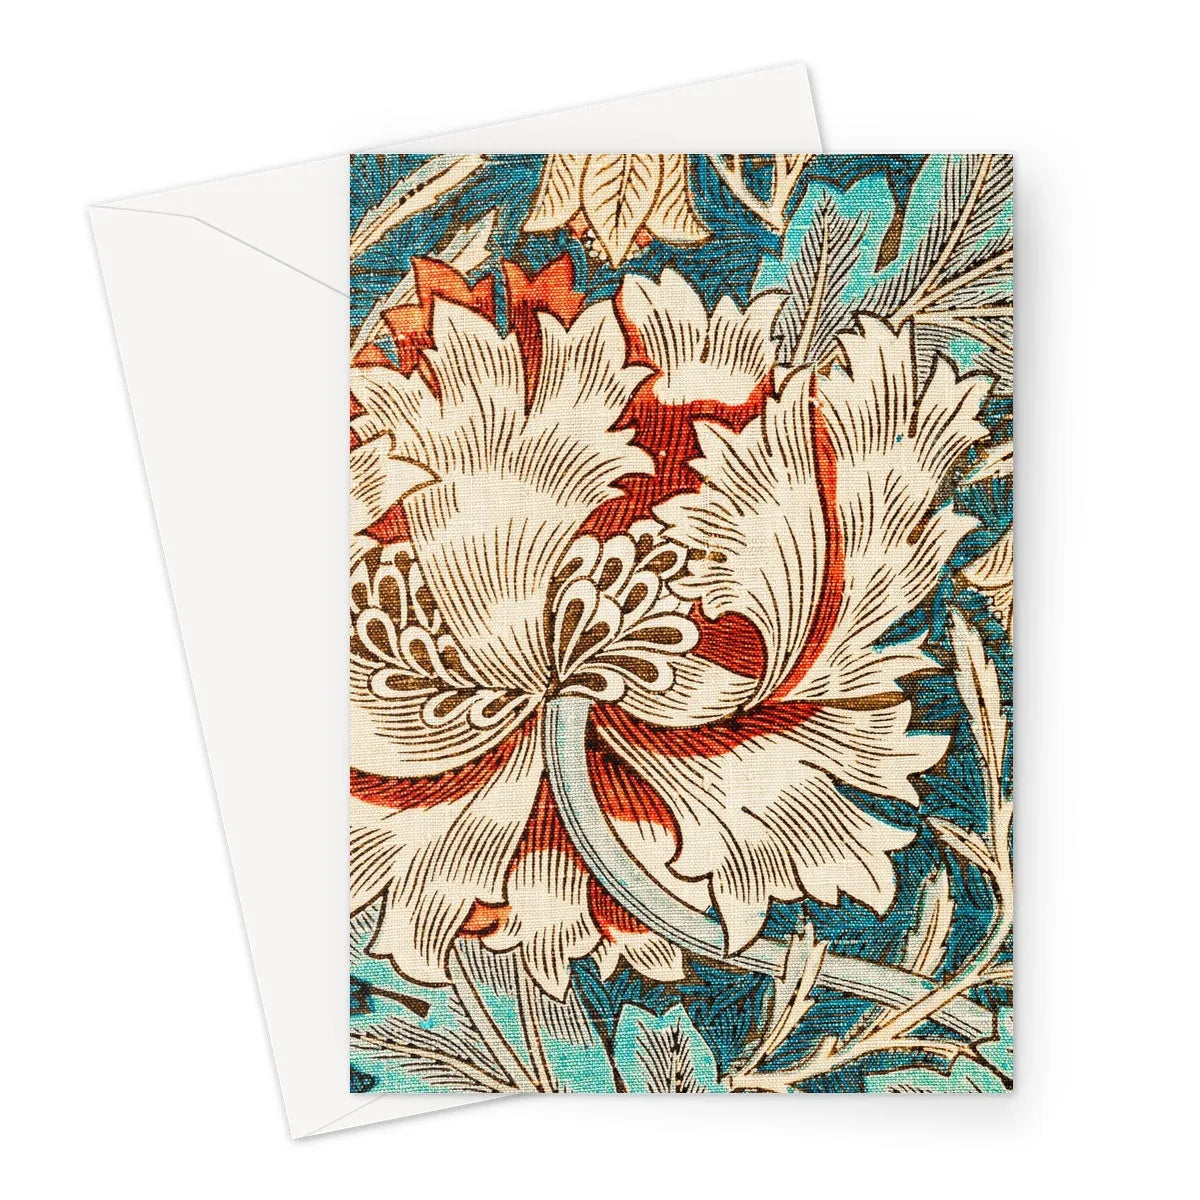 Honeysuckle Too By William Morris Greeting Card - A5 Portrait / 10 Cards - Greeting & Note Cards - Aesthetic Art